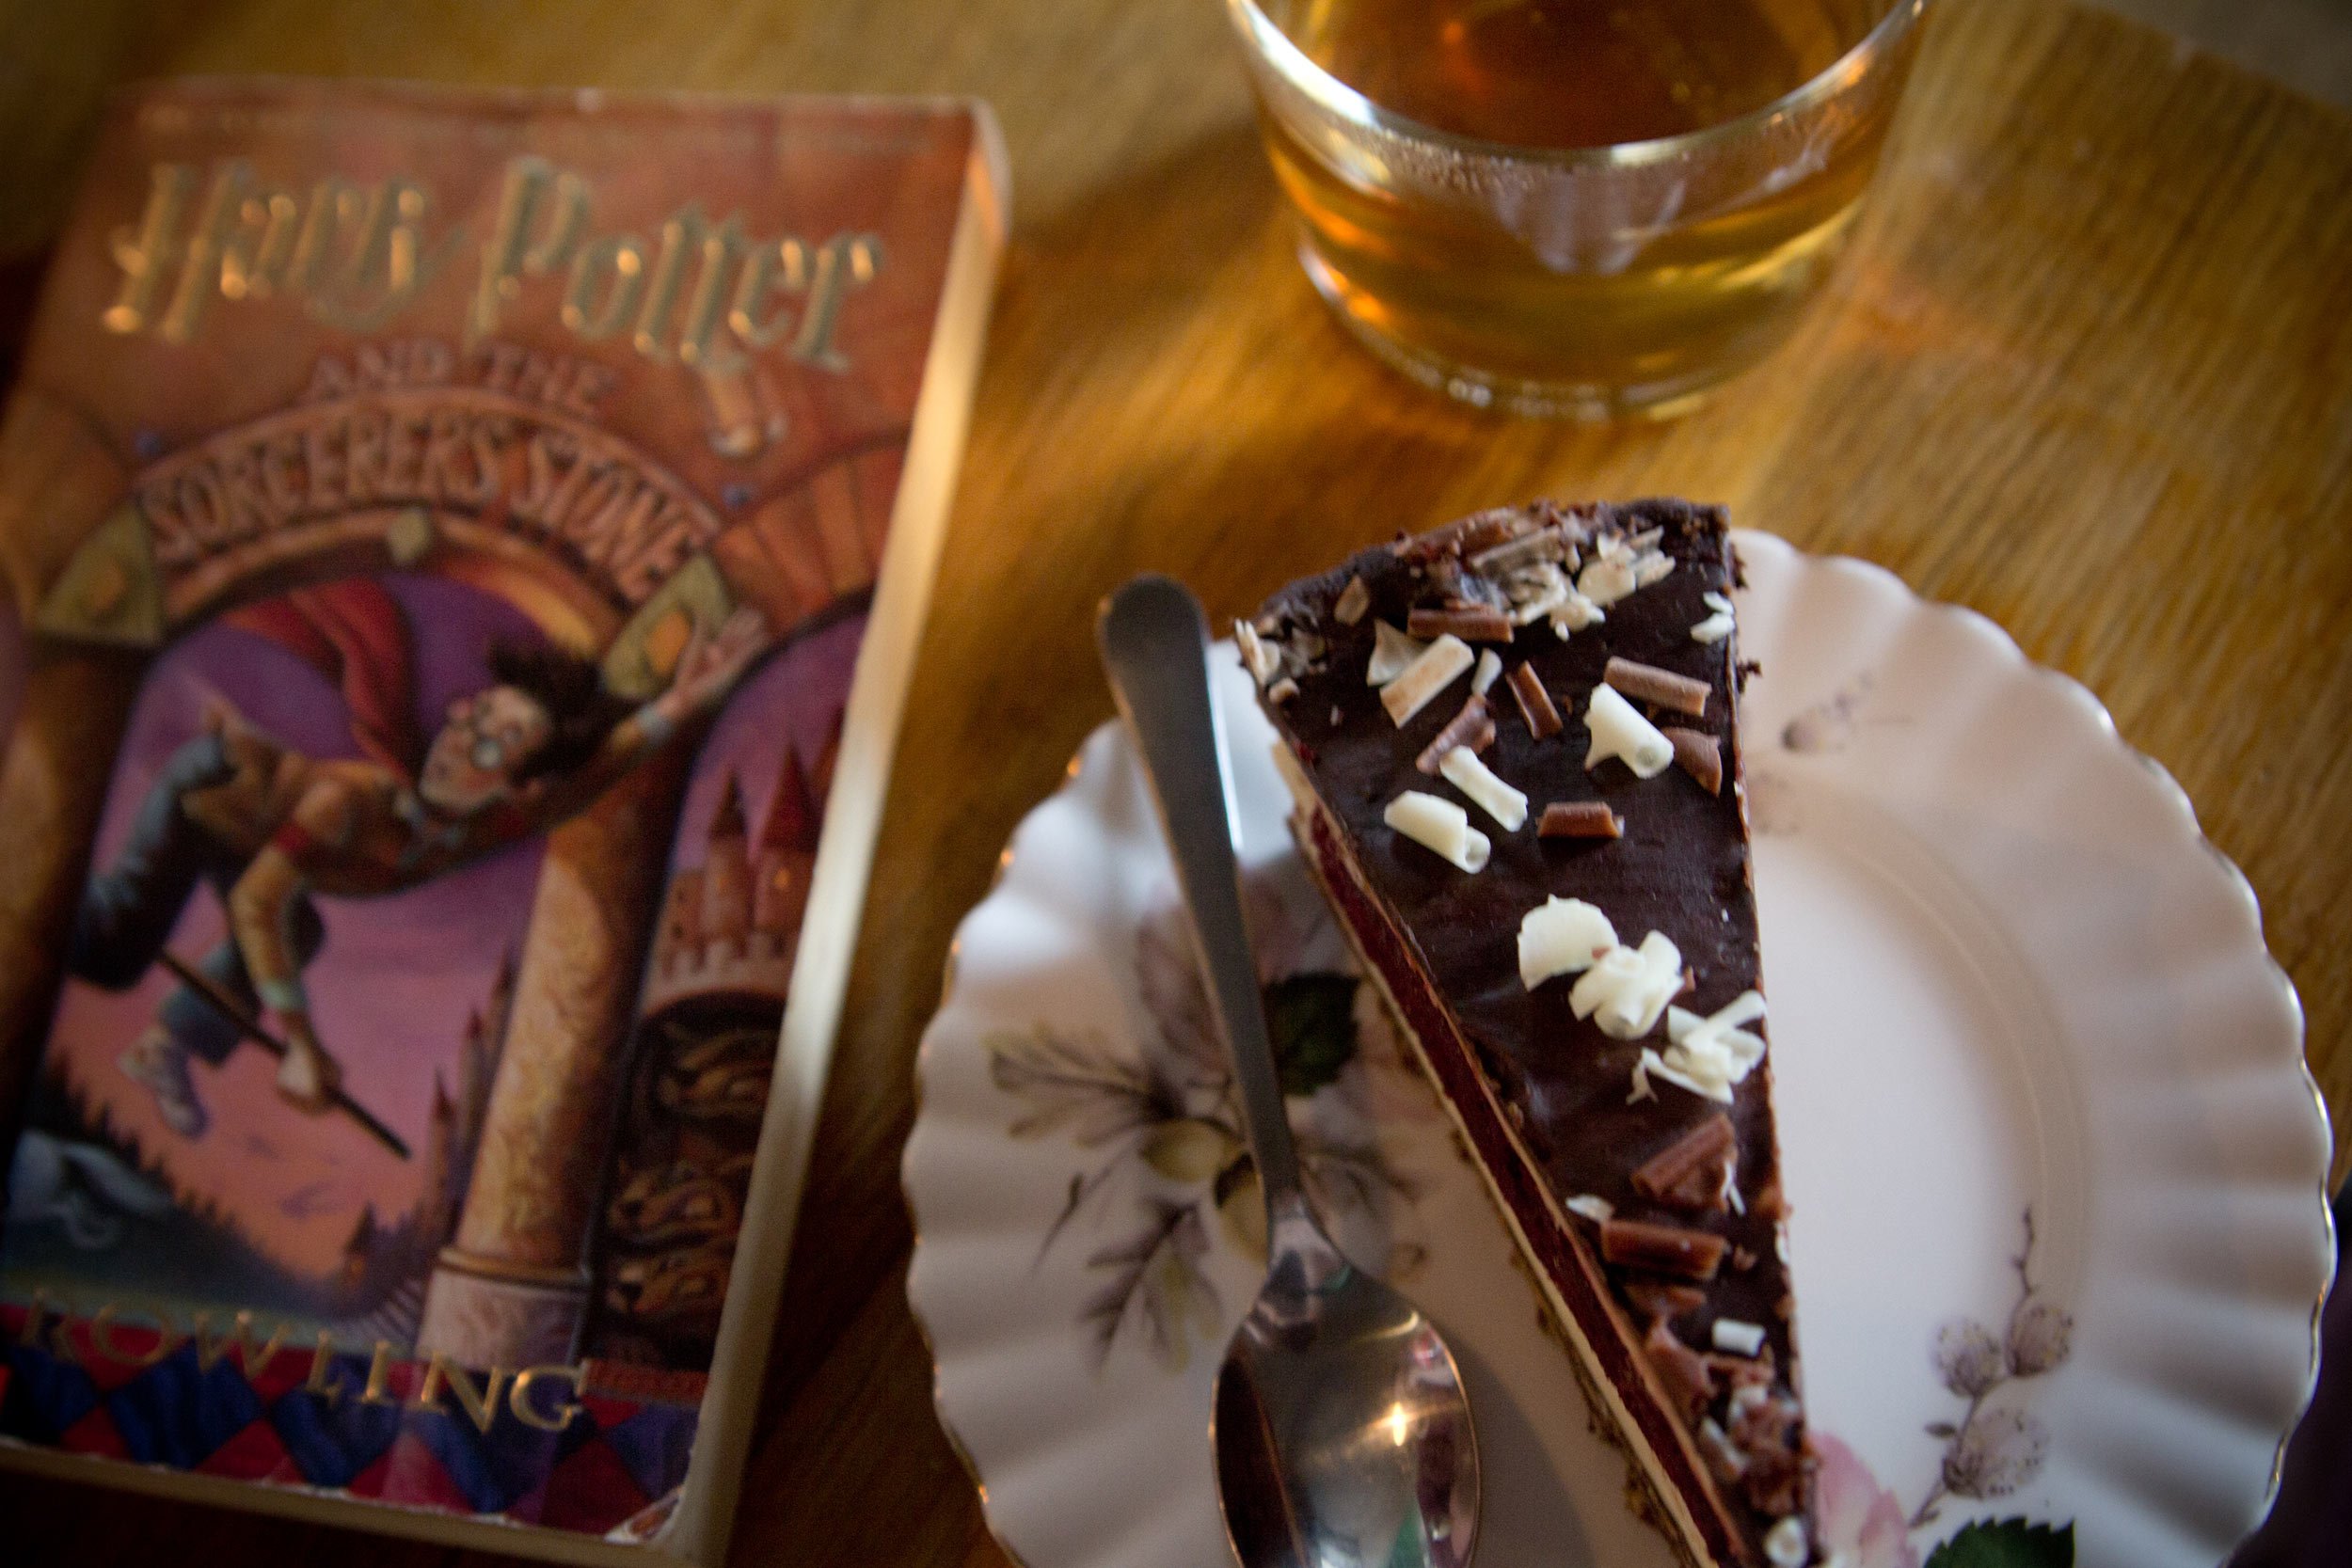 harry-potter-book-and-cheesecake-at-nicolsons-cafe-edinburgh